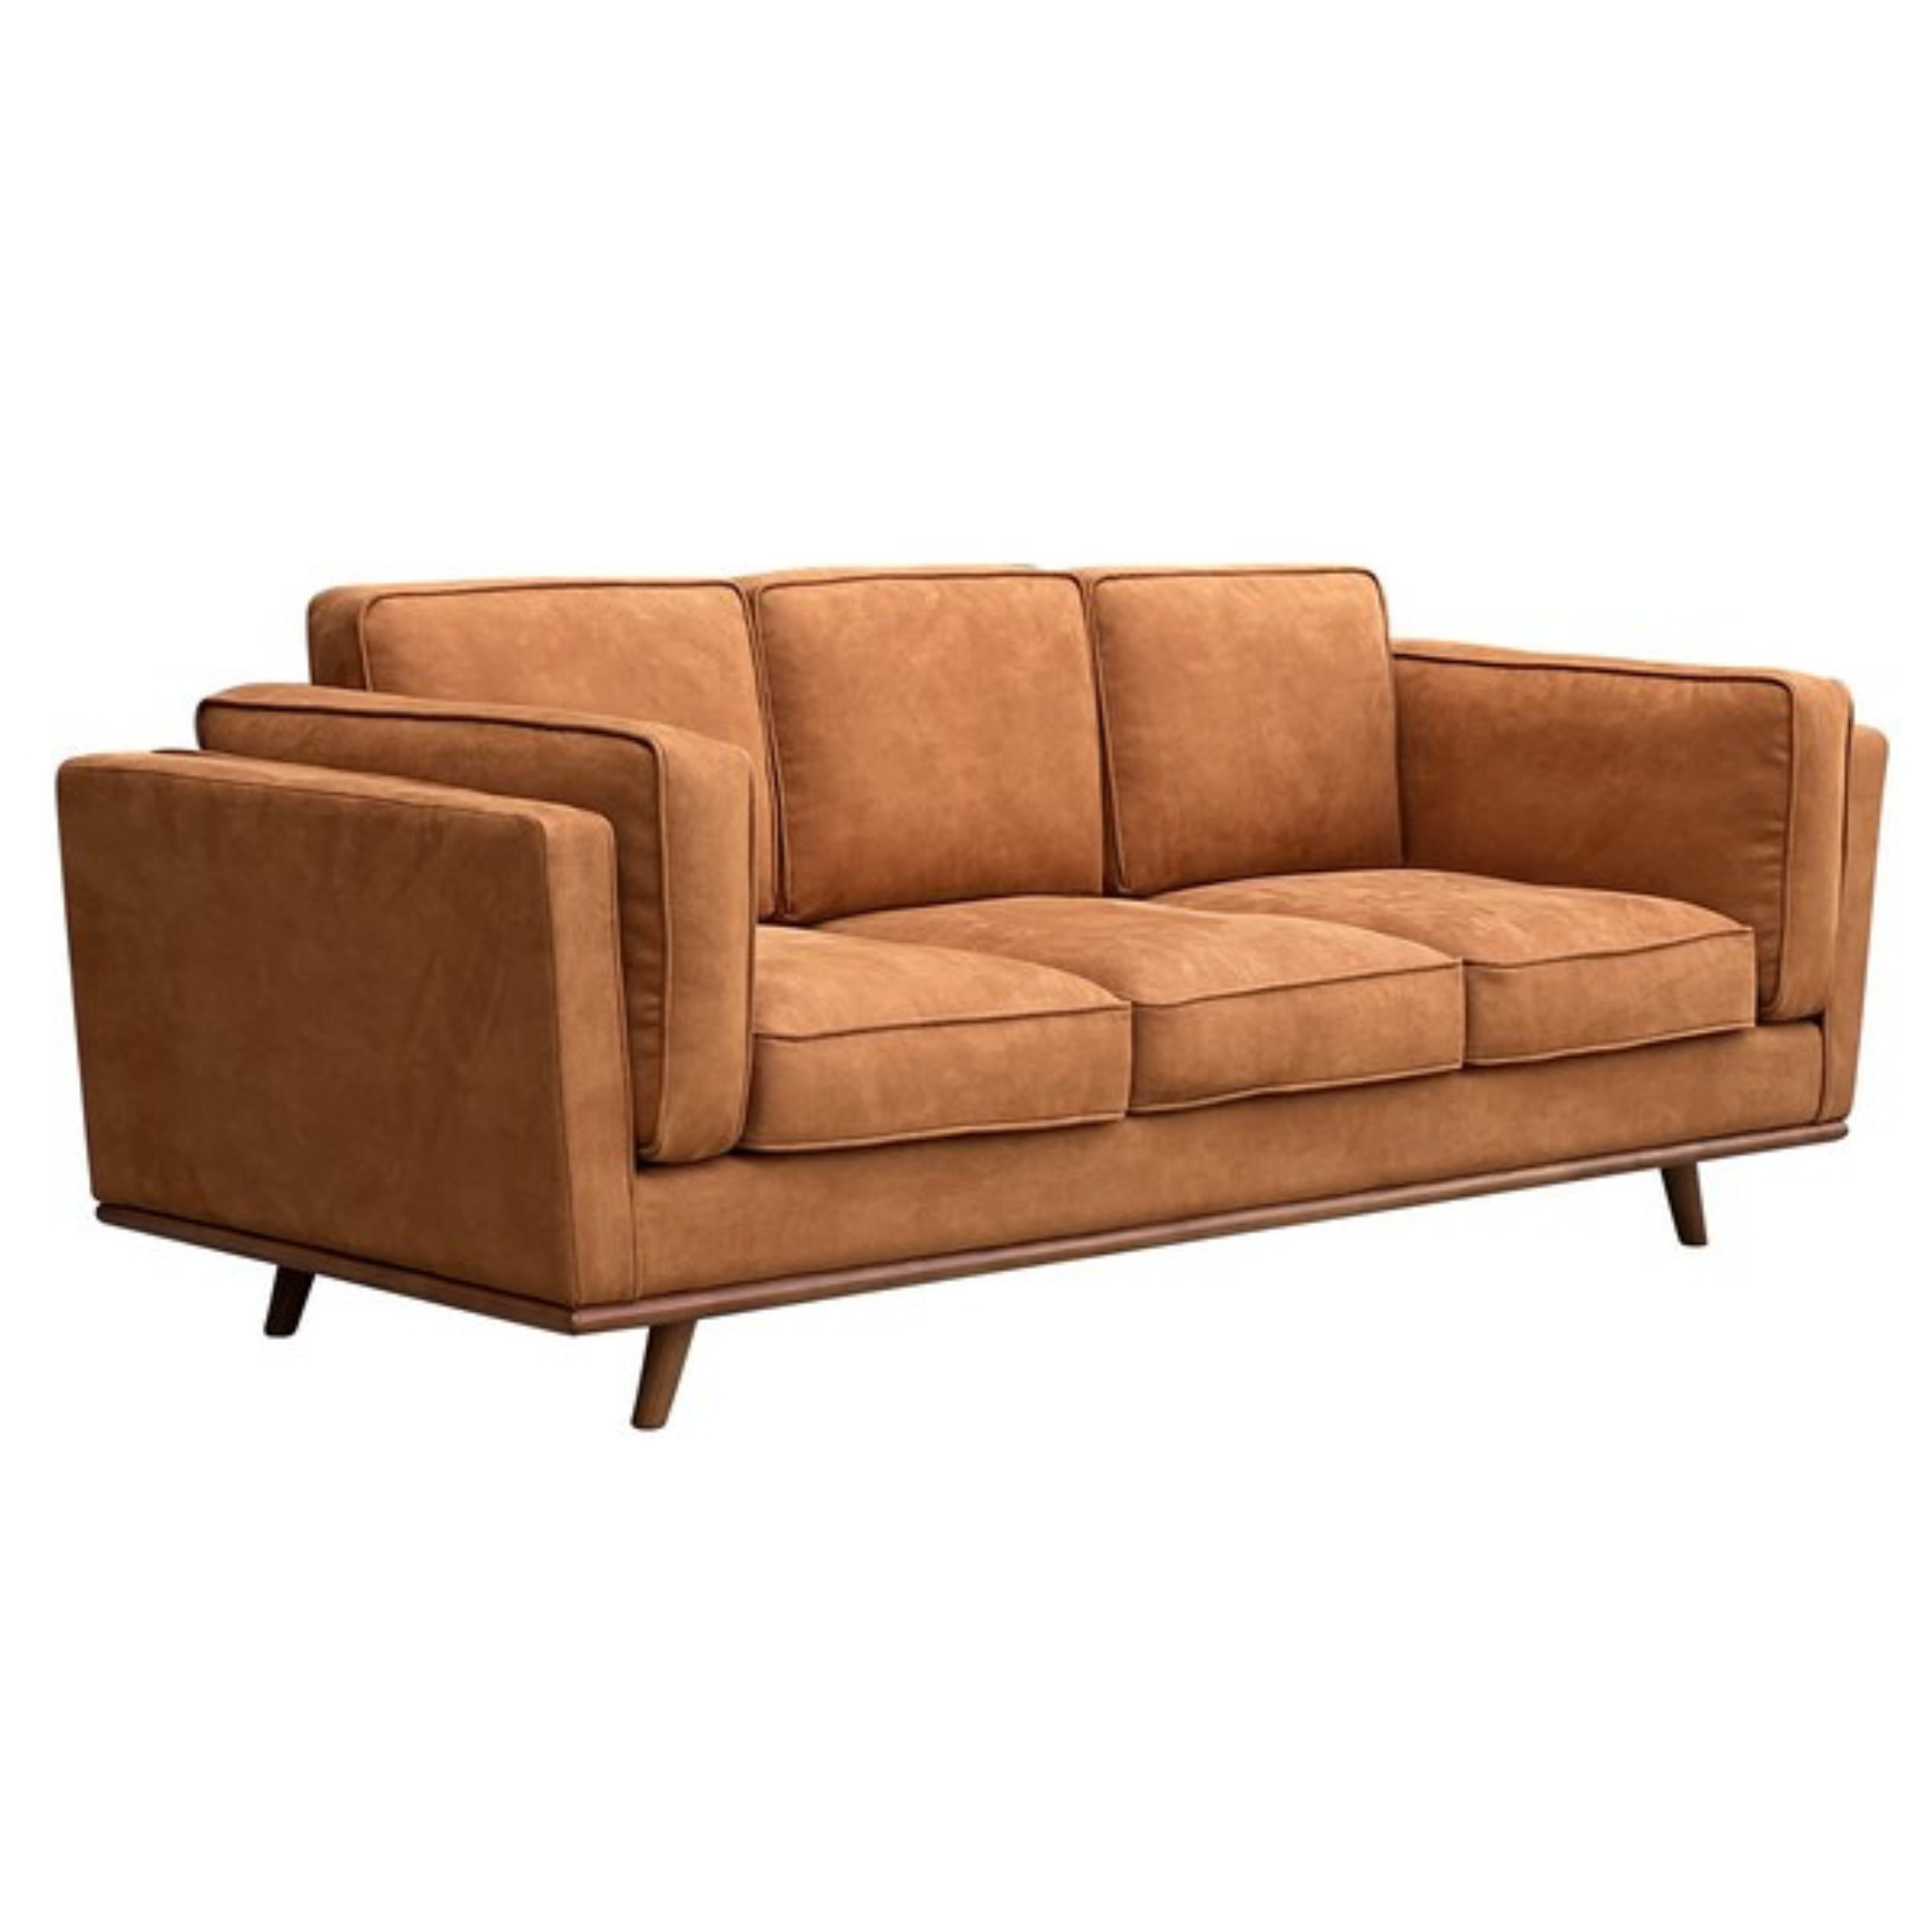 MANCHESTER 3 SEATER SOFA | 2 COLOURS